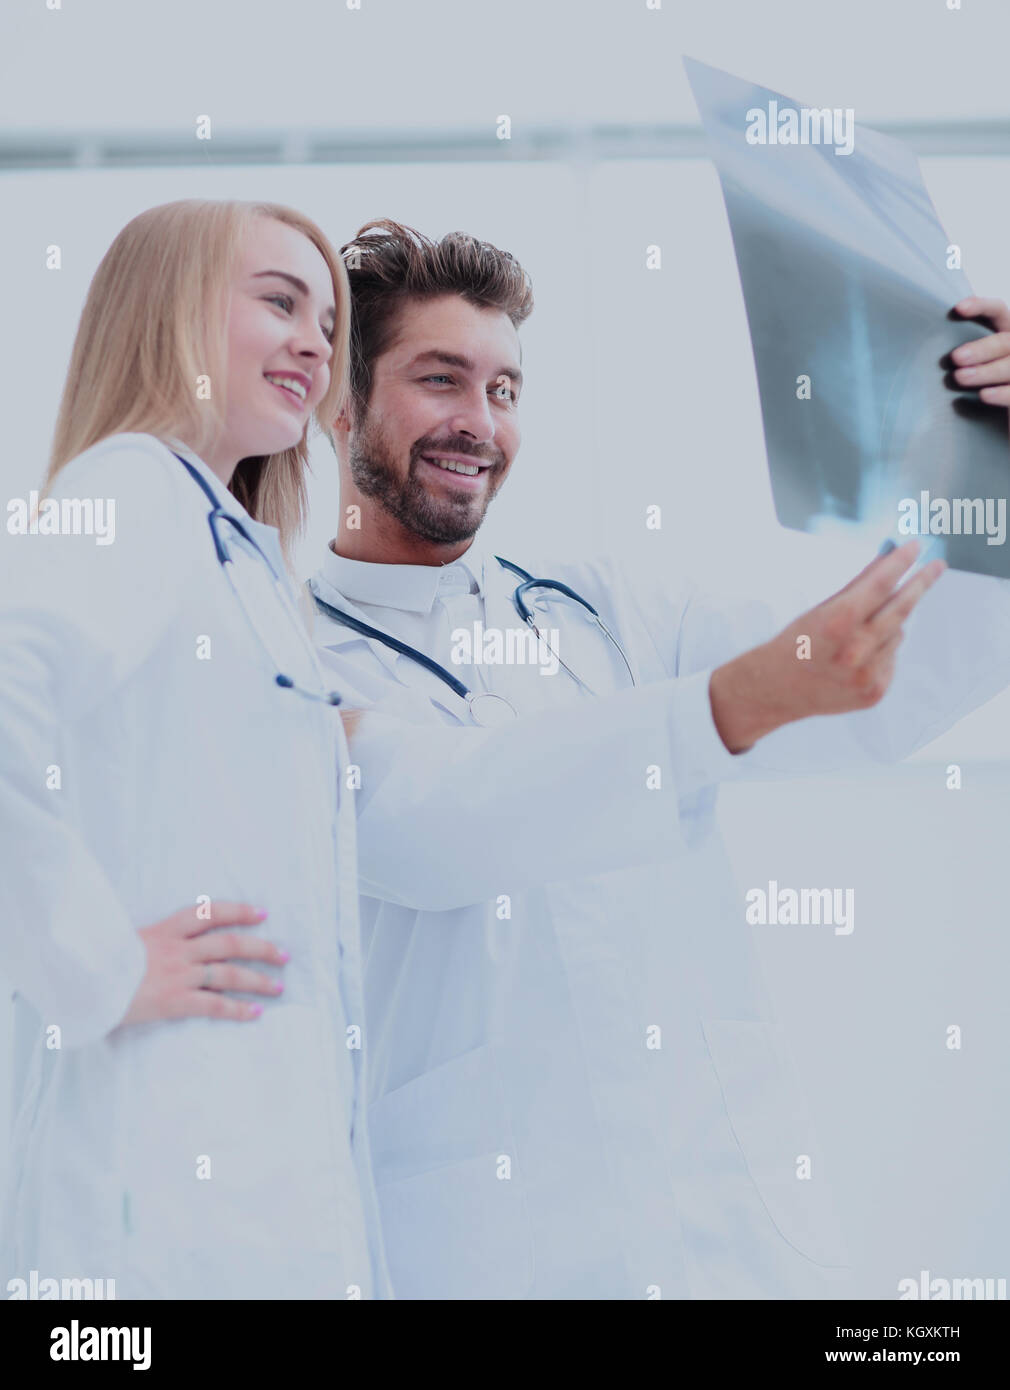 Closeup portrait of intellectual healthcare professionals with white labcoat, looking at full body x-ray radiographic image Stock Photo